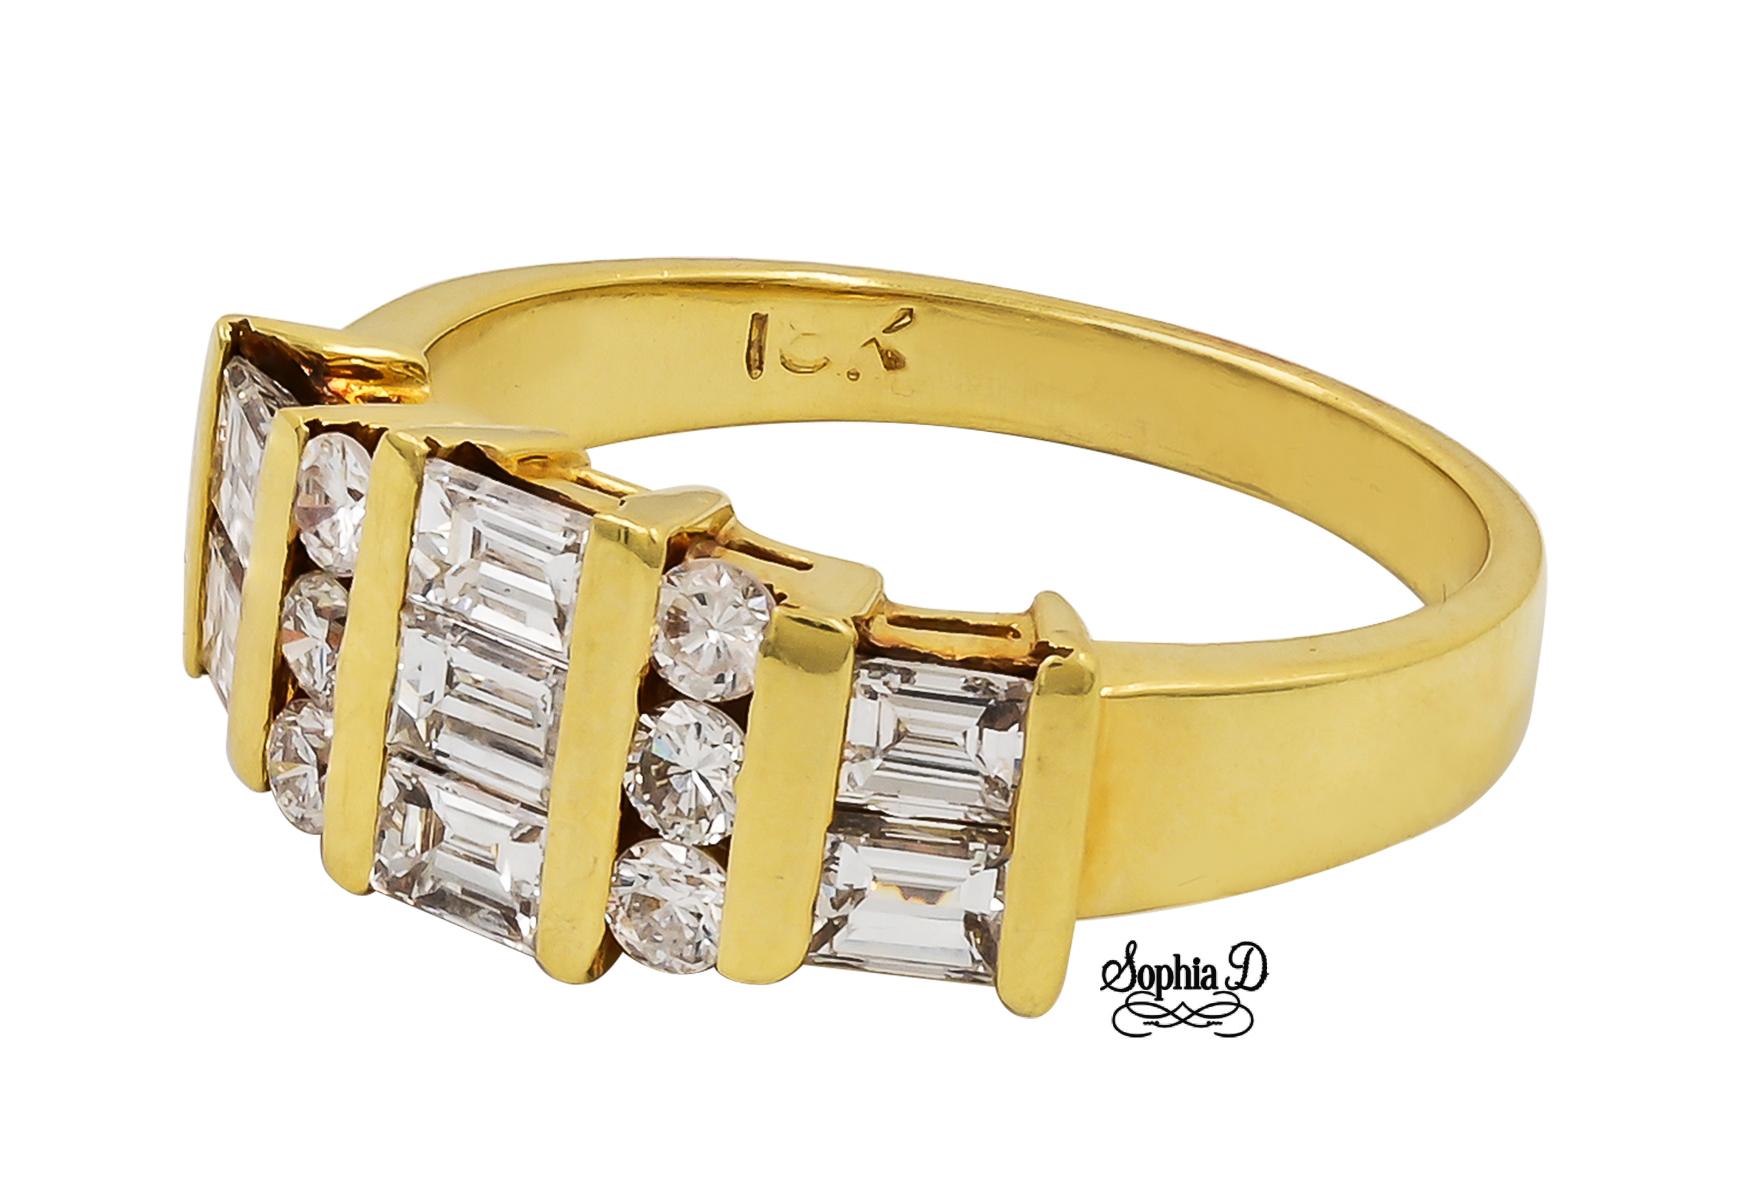 18K yellow gold ring with emerald cut and round cut diamonds.

Sophia D by Joseph Dardashti LTD has been known worldwide for 35 years and are inspired by classic Art Deco design that merges with modern manufacturing techniques.